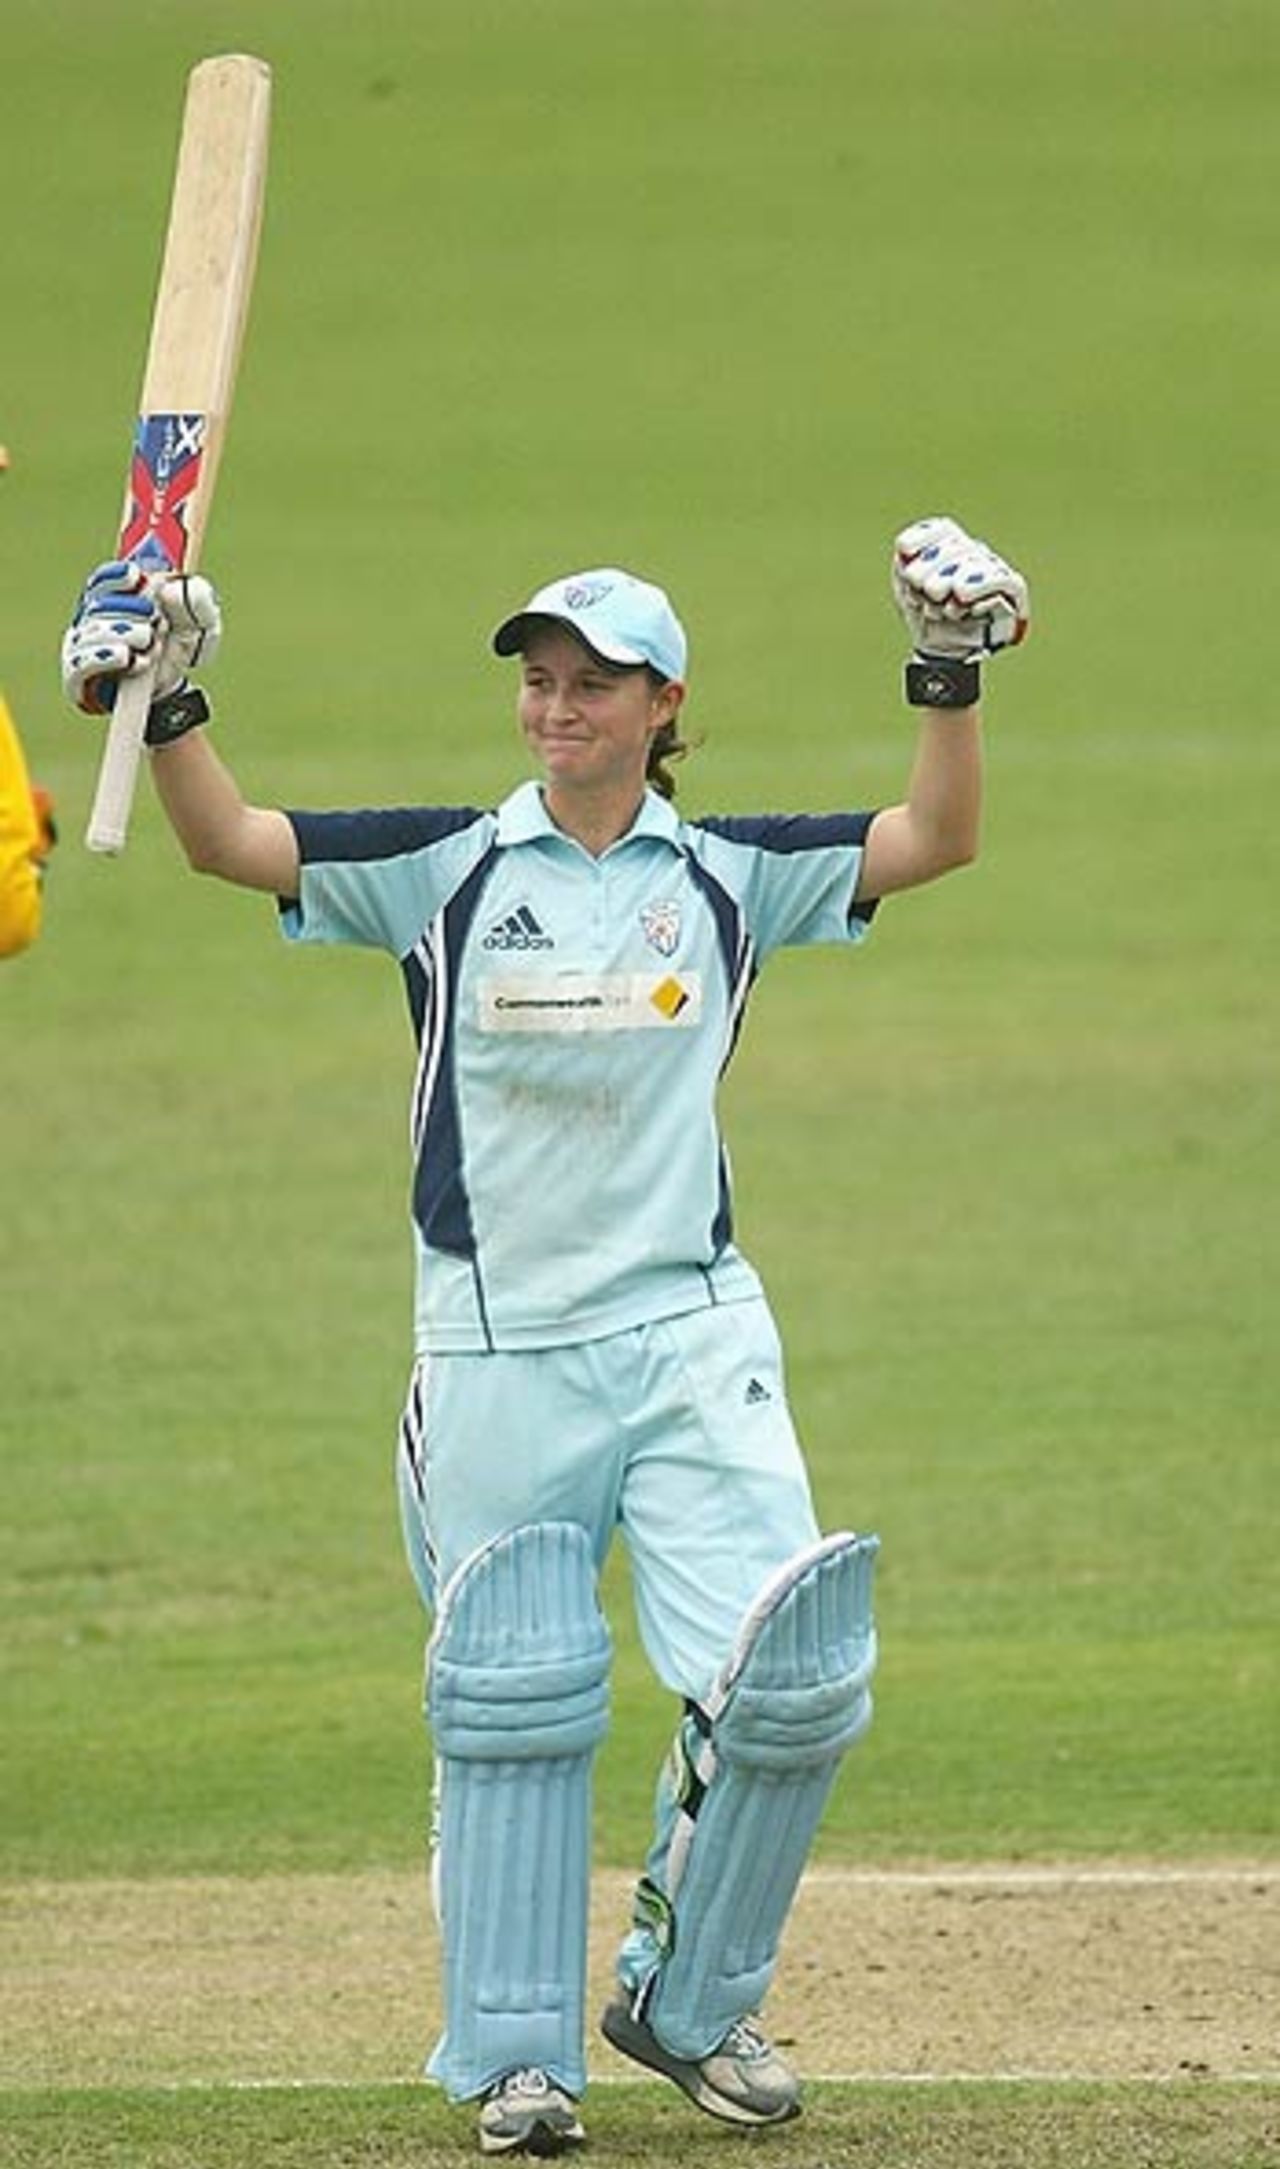 Leah Poulton scored an unbeaten 70 to lead New South Wales to victory over Queensland, New South Wales Women v Queensland Women, 1st Final, North Sydney Oval, February 3 2006 